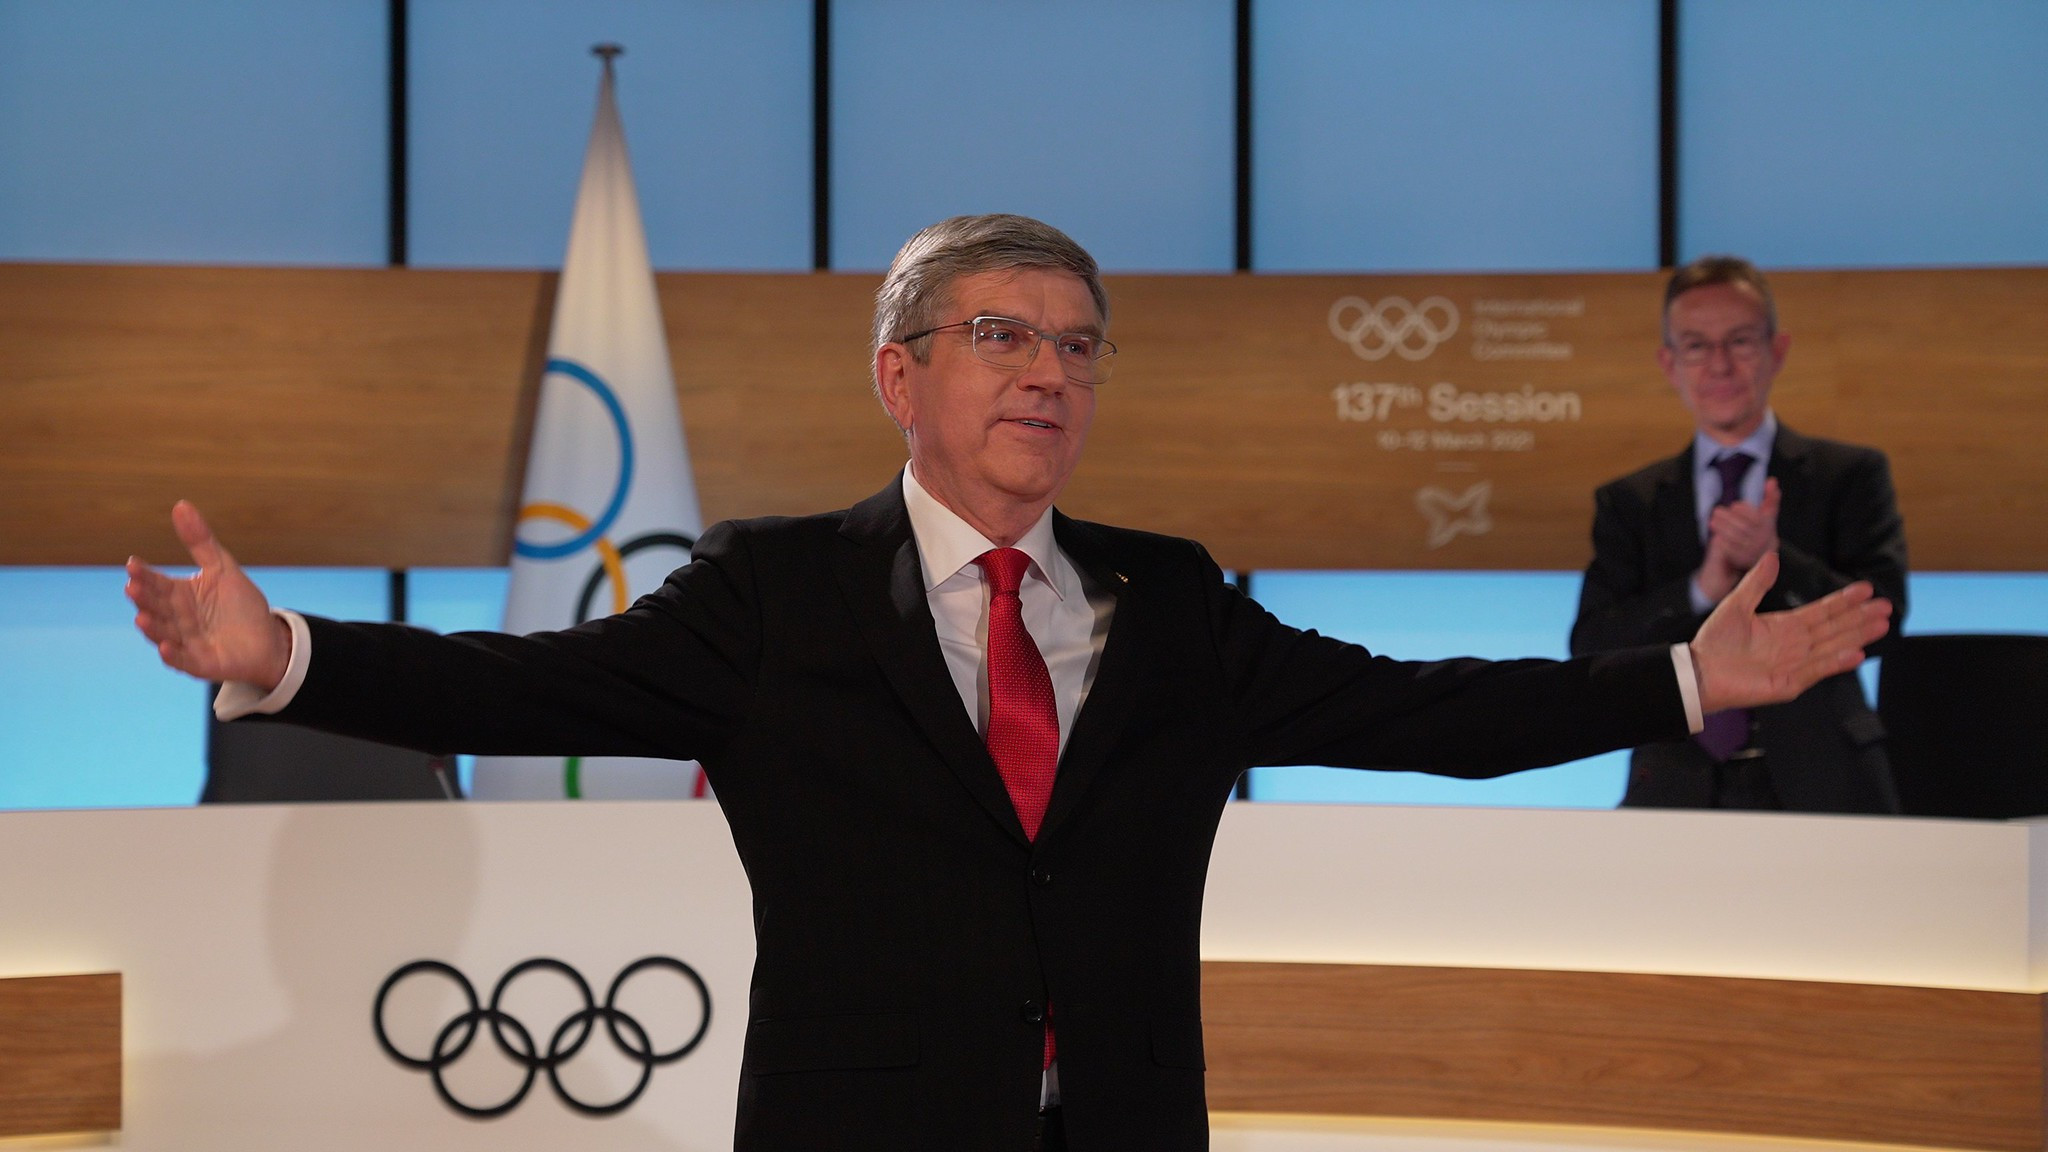 IOC President Thomas Bach was re-elected unopposed at the organisation's 137th Session, held virtually, last week ©IOC